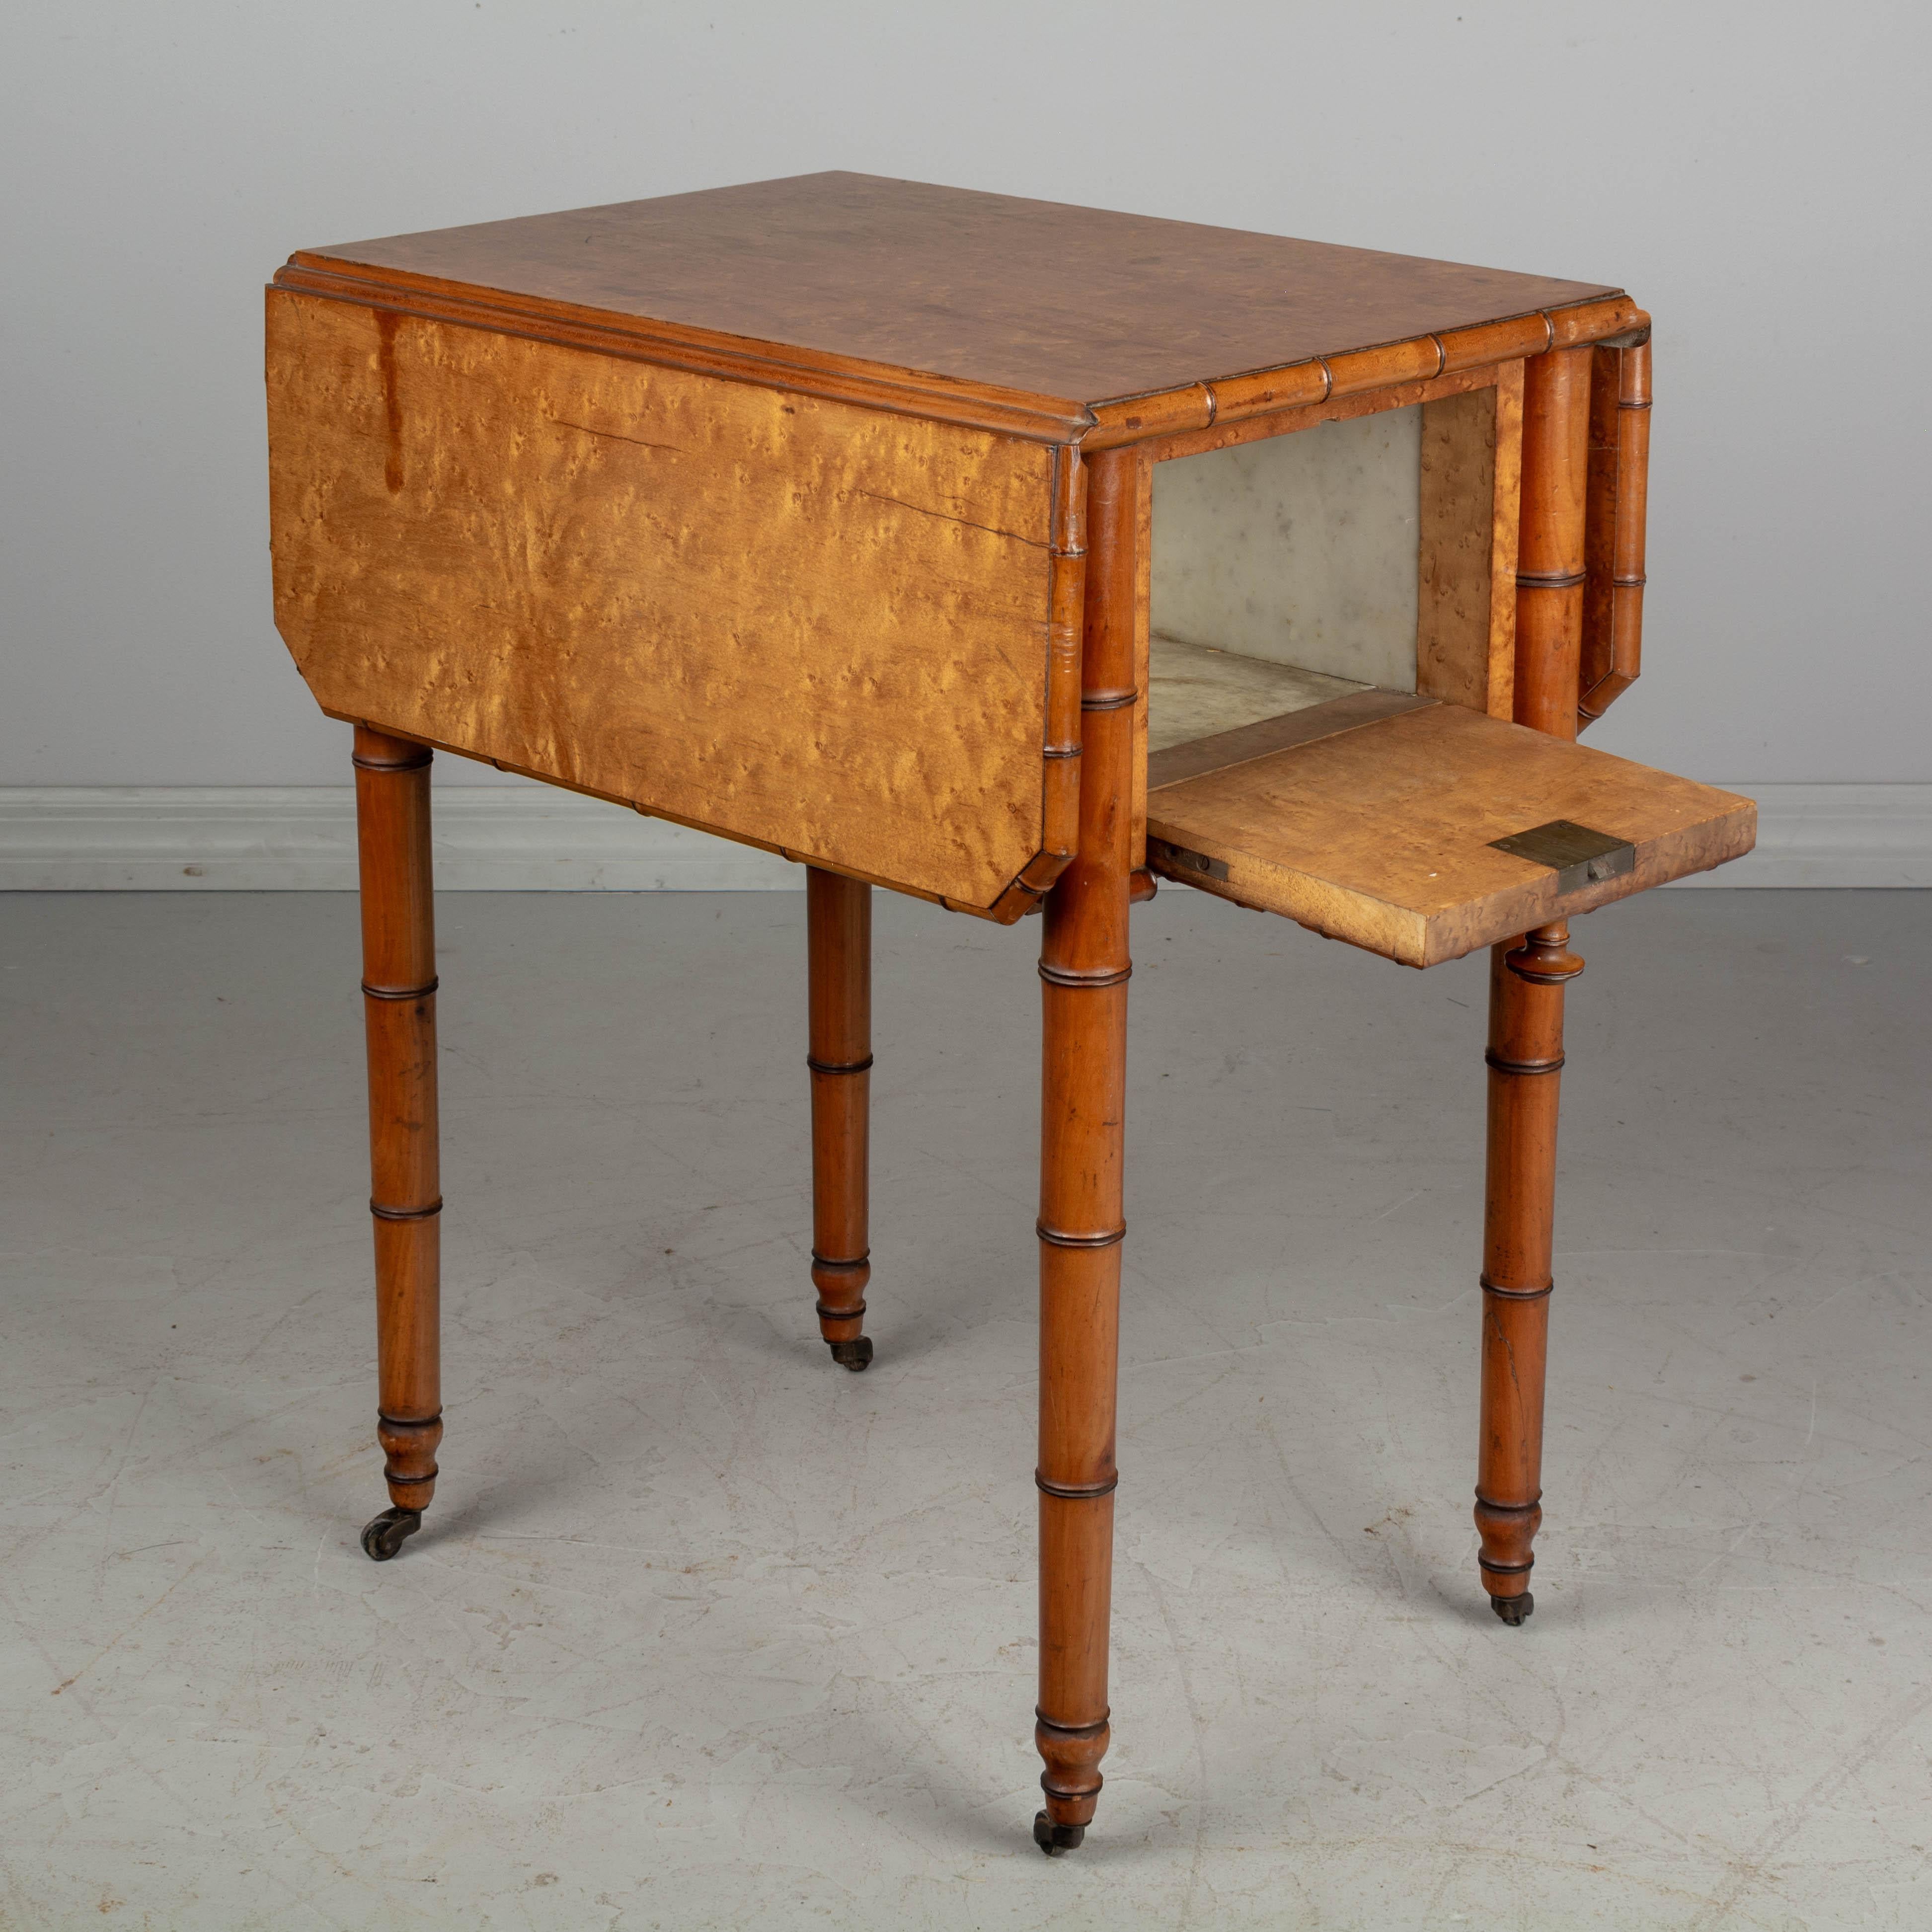 Hand-Crafted 19th Century French Faux Bamboo Side Table